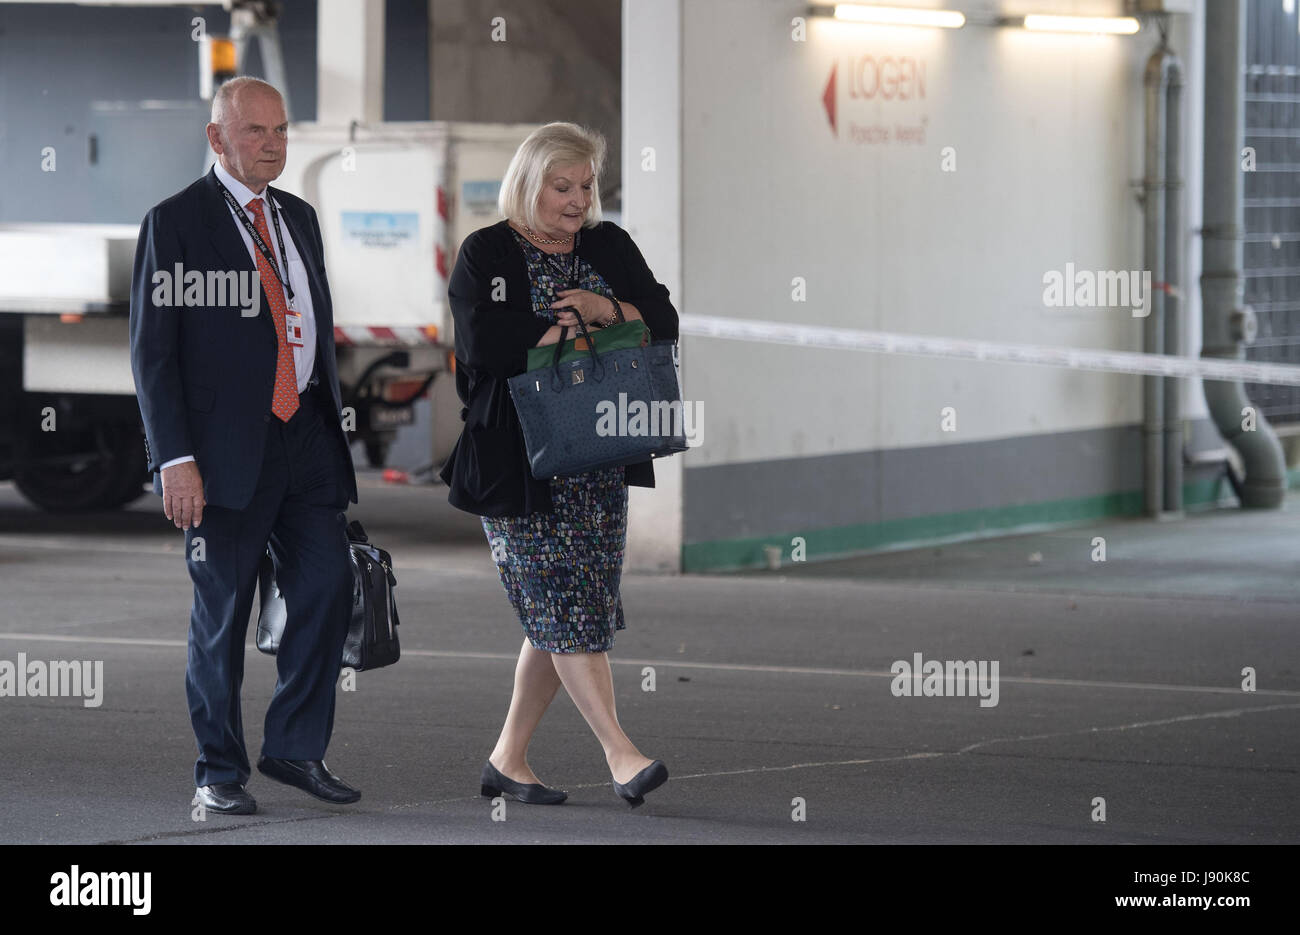 Stuttgart, Germany. 30th May, 2017. Member of the Supervisory Board of Porsche SE, Ferdinand Piech, and his wife Ursula walk into a parking lot after the company's general annual meeting in Stuttgart, Germany, 30 May 2017. Photo: Marijan Murat/dpa/Alamy Live News Stock Photo